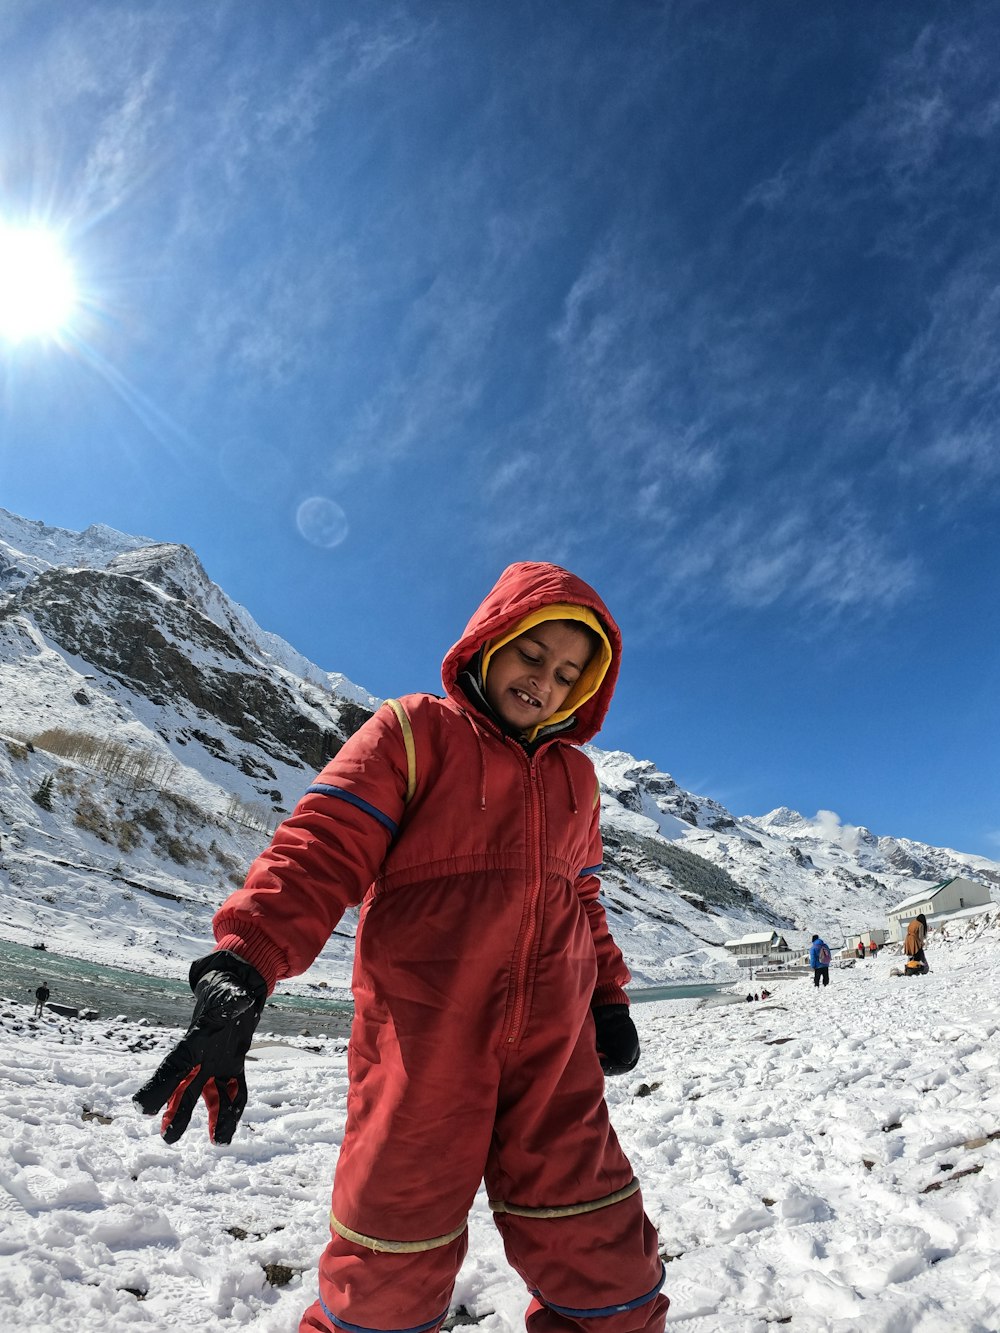 a young child in a red snowsuit standing in the snow